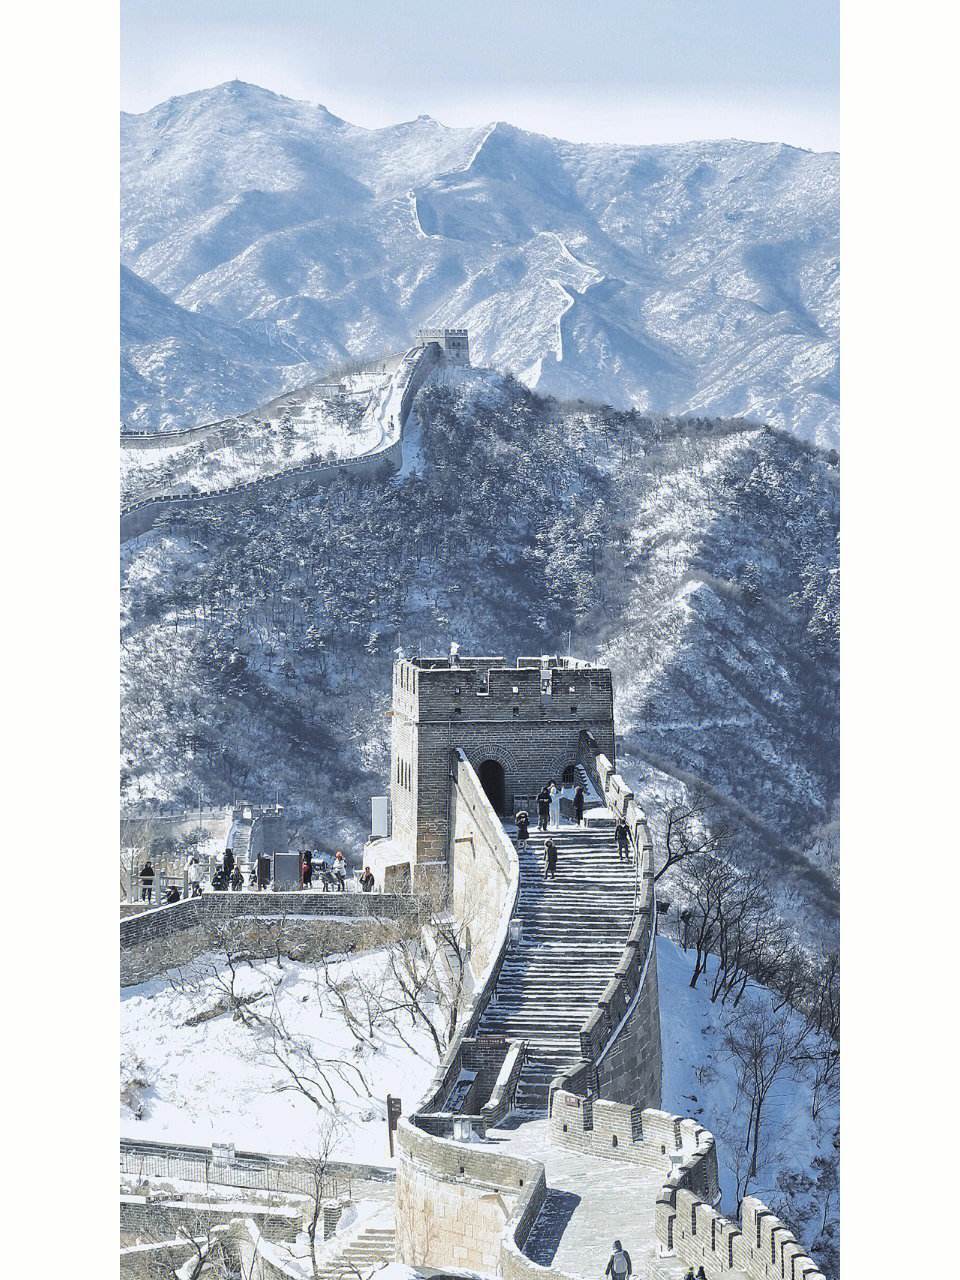 On the time of romantic house, standing on the top of the Great Wall, seeing the style of the mountains and beautiful rivers and mountains for thousands of miles.